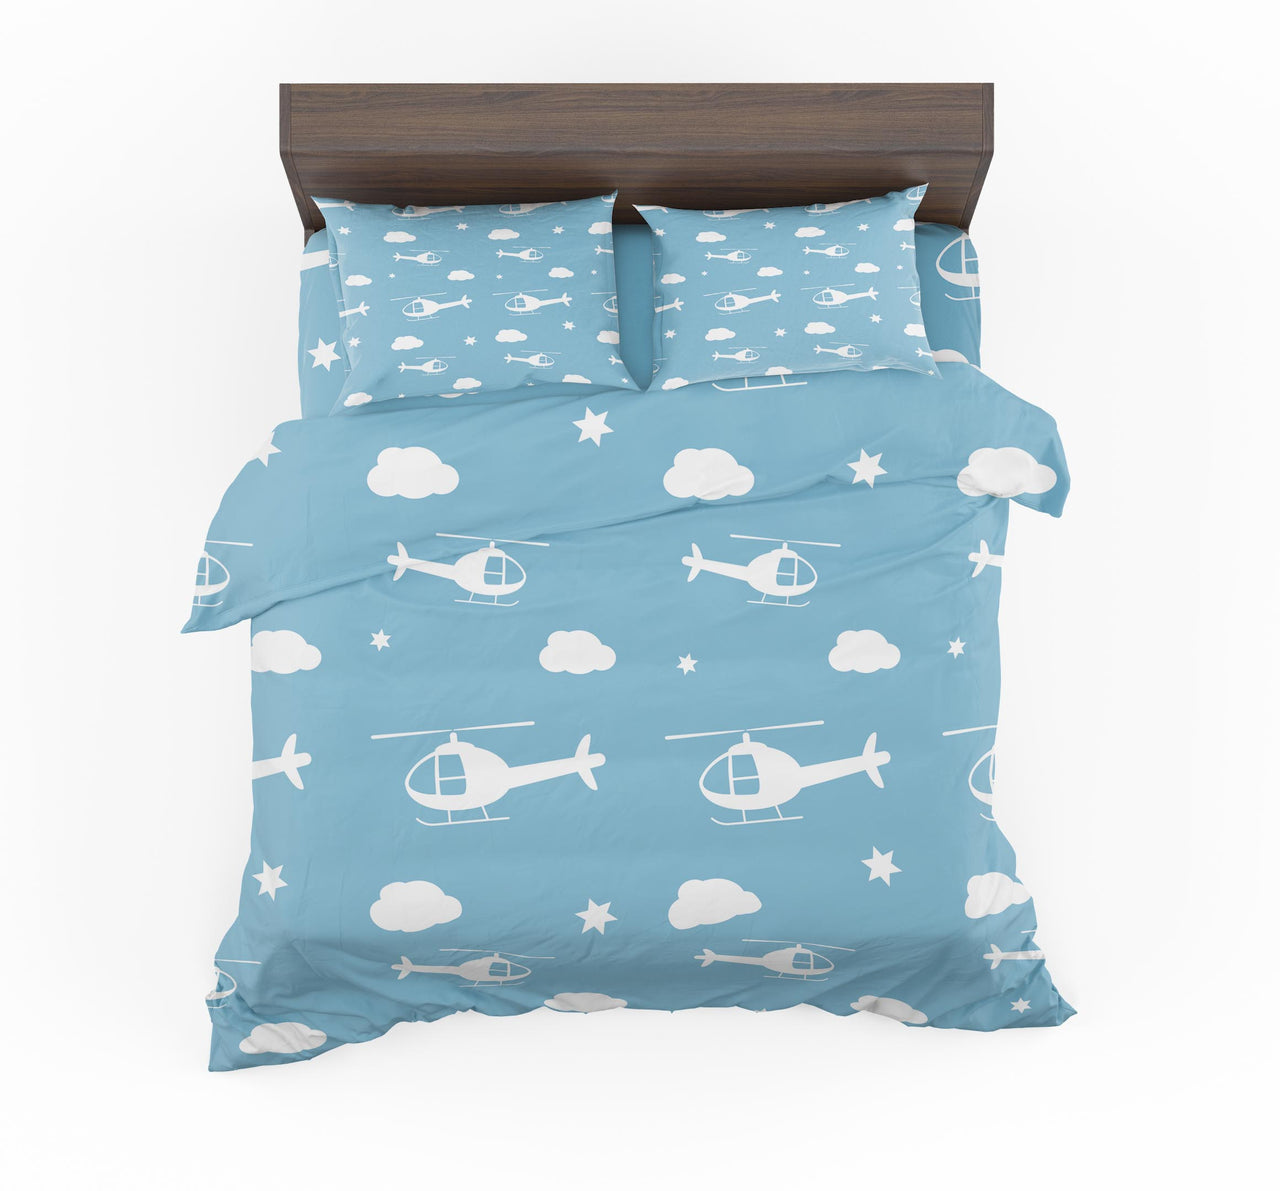 Helicopters & Clouds Designed Bedding Sets